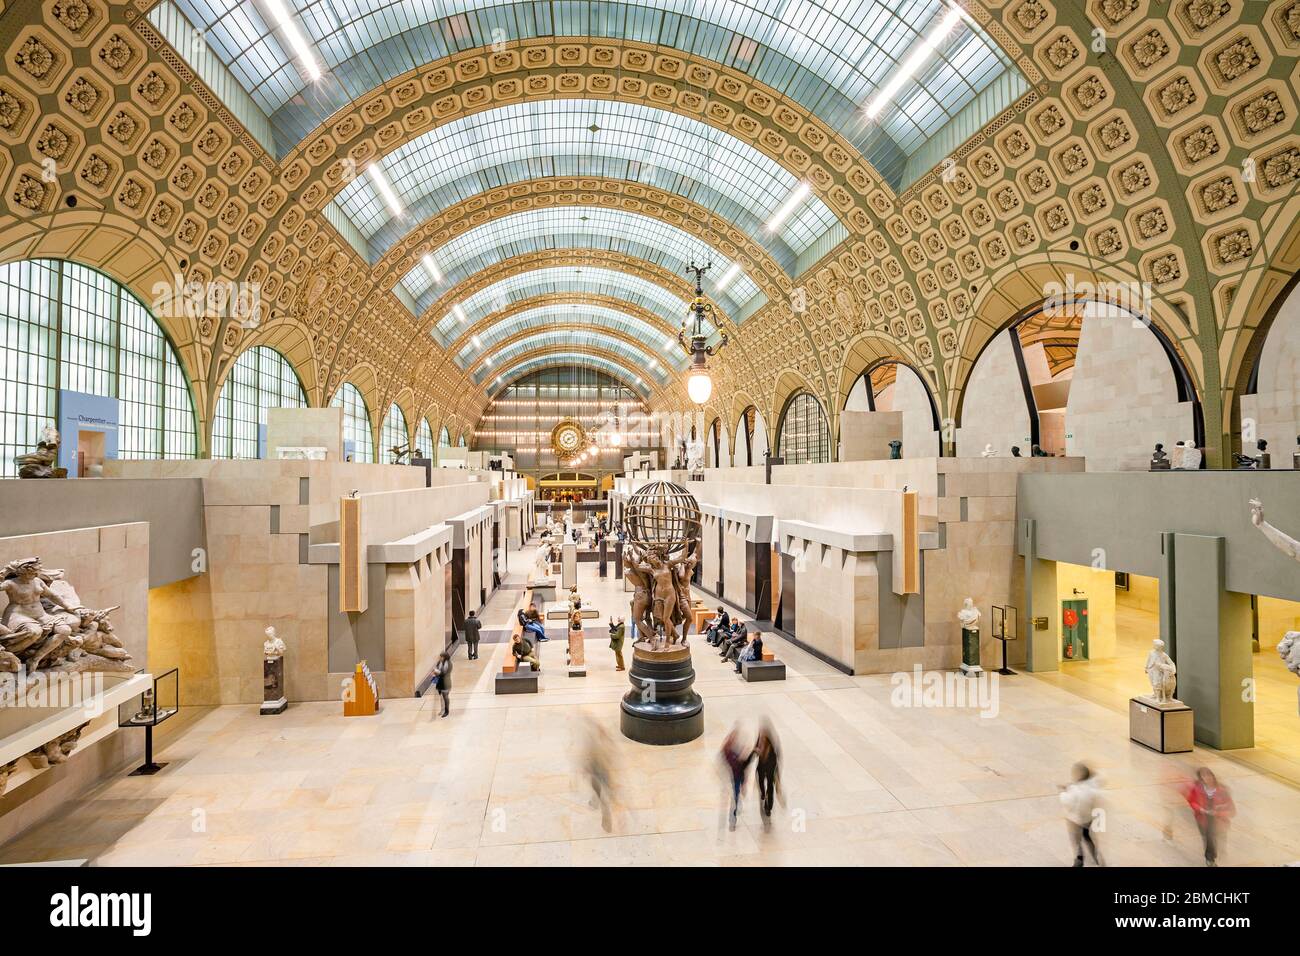 Musée d'Orsay interior in Paris France. The building is the former Gare d'Orsay, a Beaux-Arts railway station built between 1898 and 1900. Stock Photo